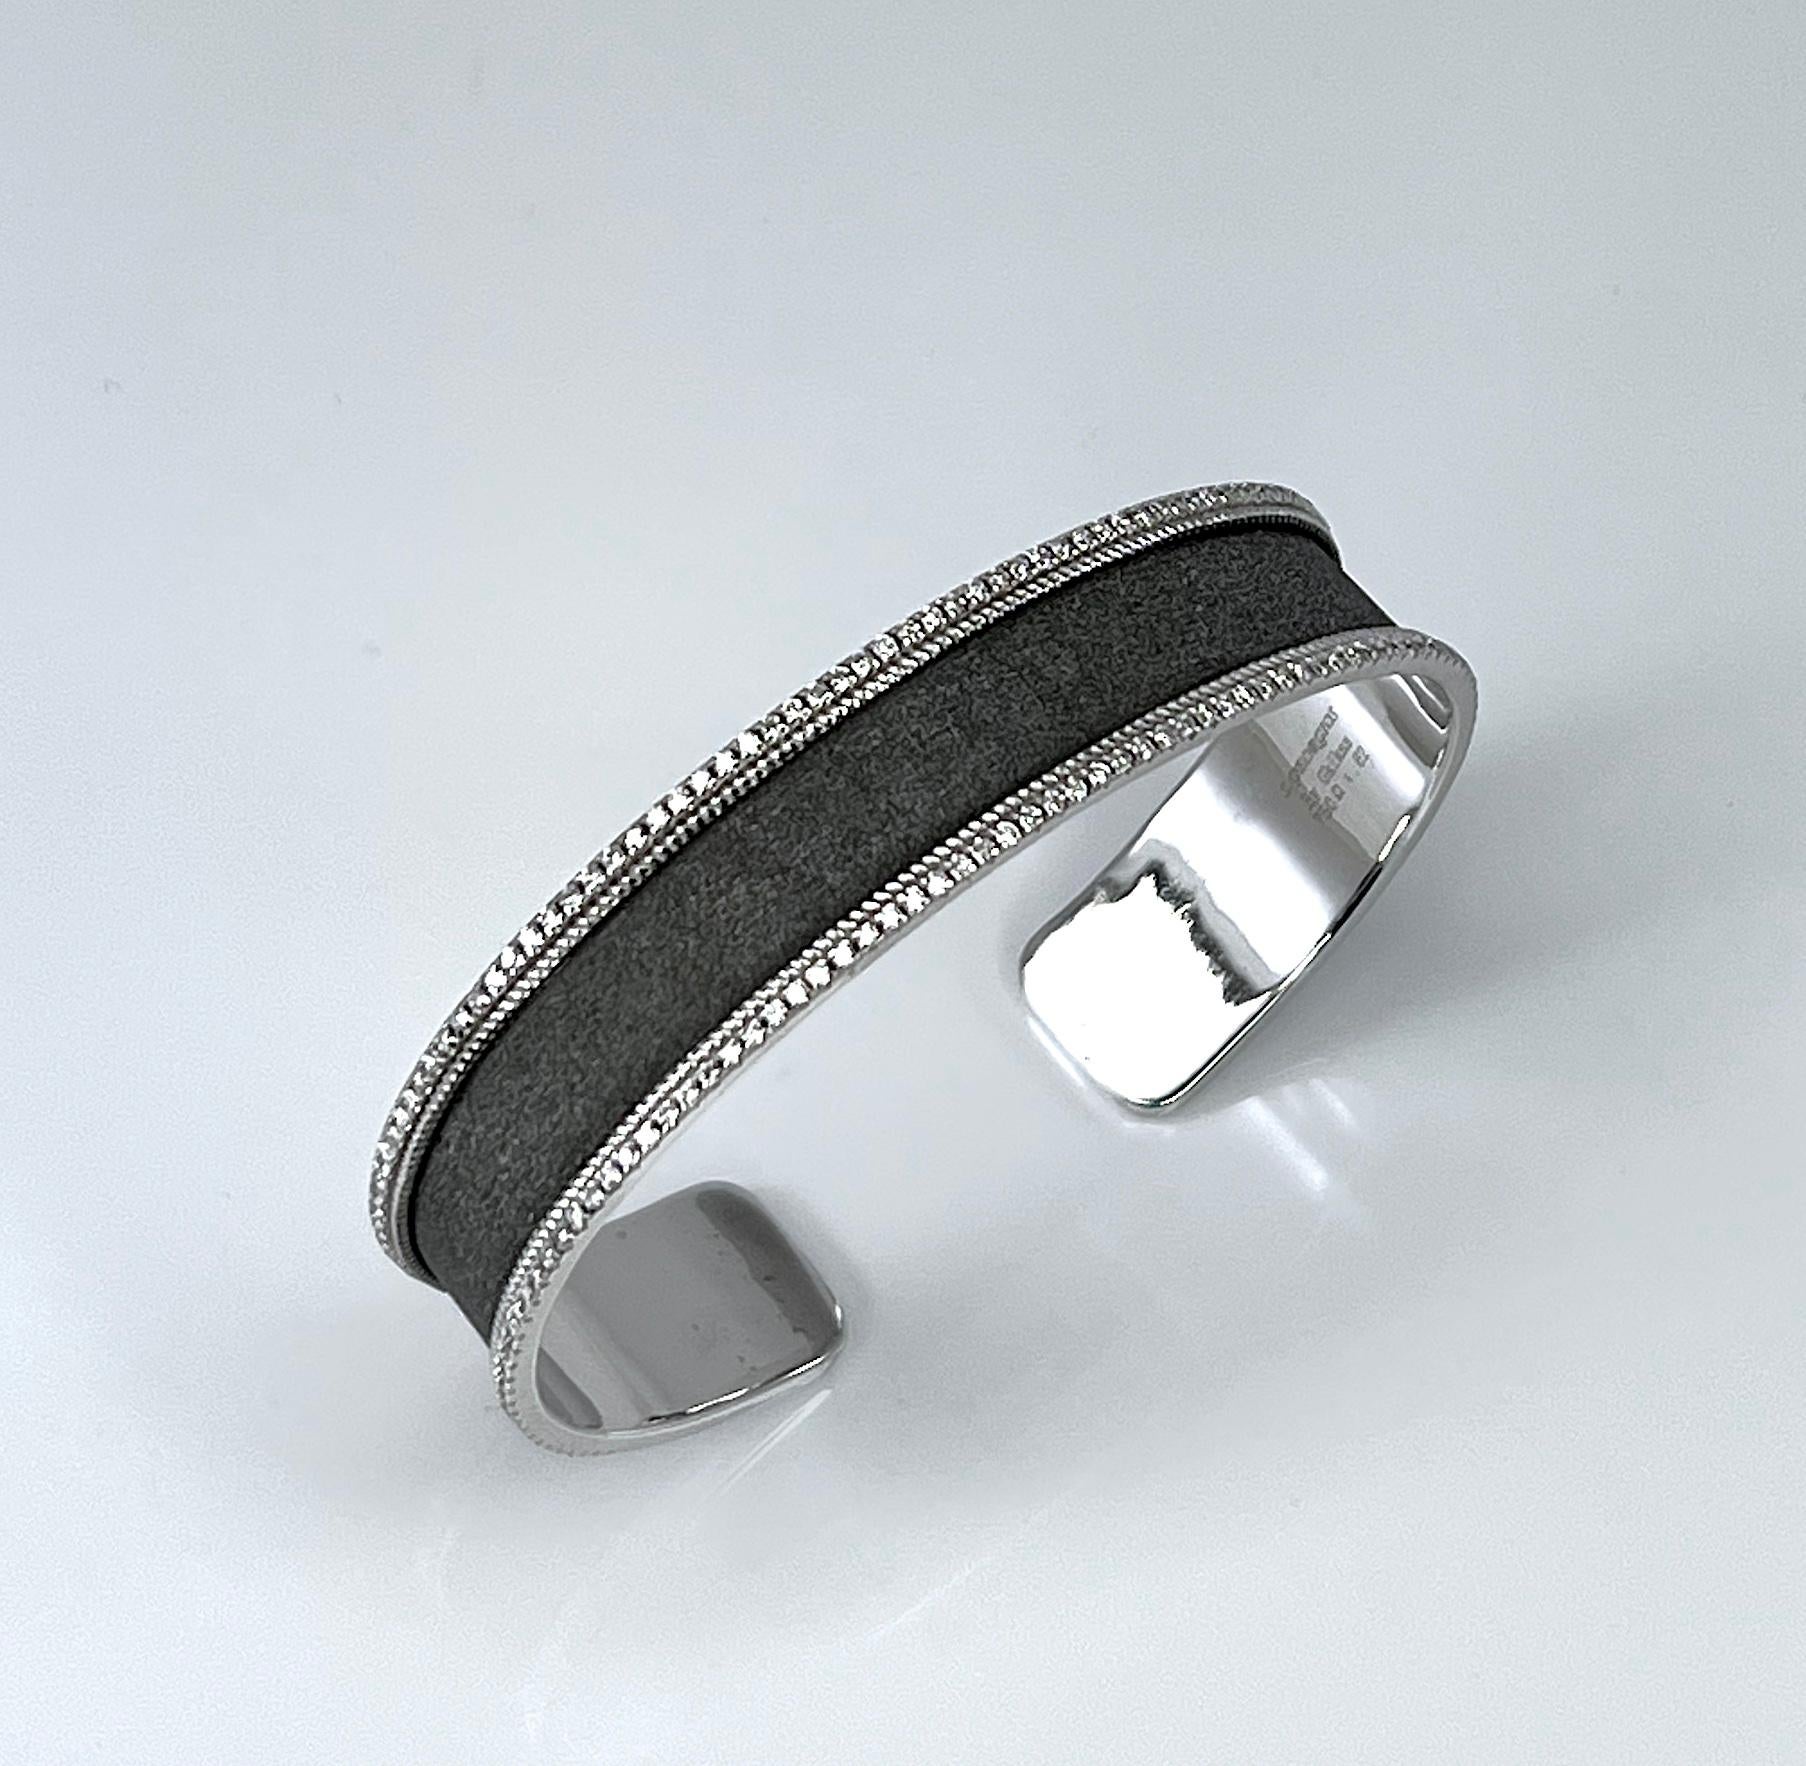 S.Georgios designer bangle bracelet is handmade from 18 Karat white gold. It is finished in Byzantine style with a unique velvet texture on the background and an overlay of Black Rhodium. The bracelet features two lines of brilliant-cut white